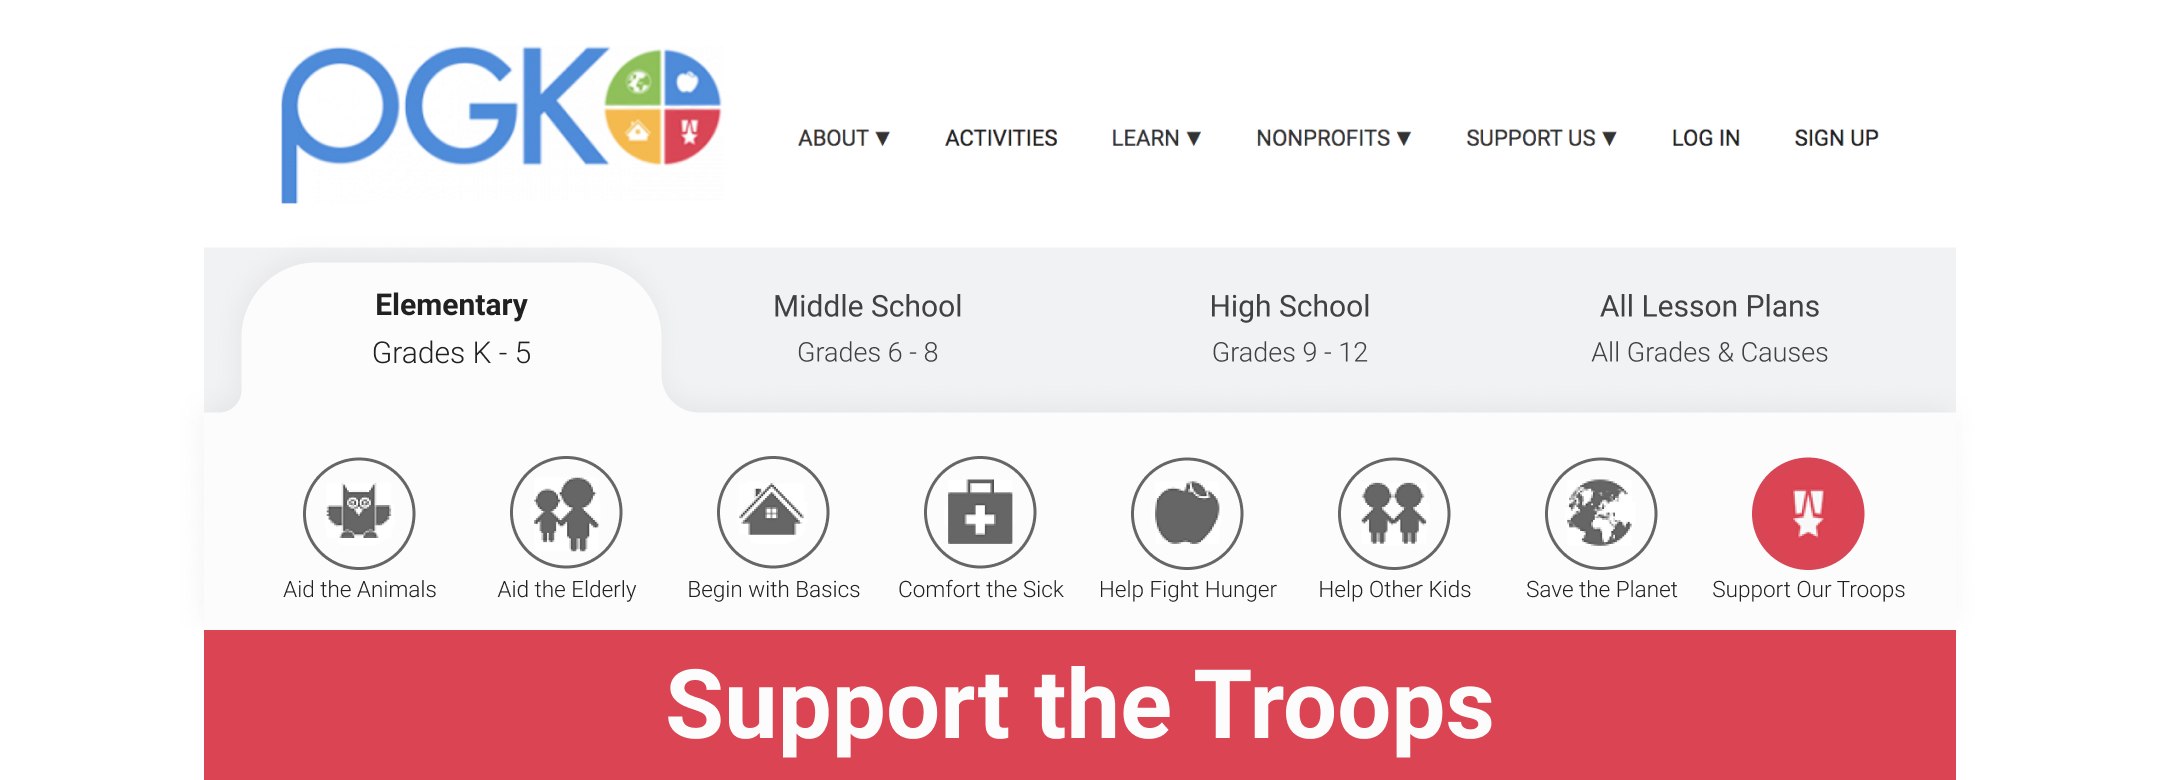 Support the Troops Top